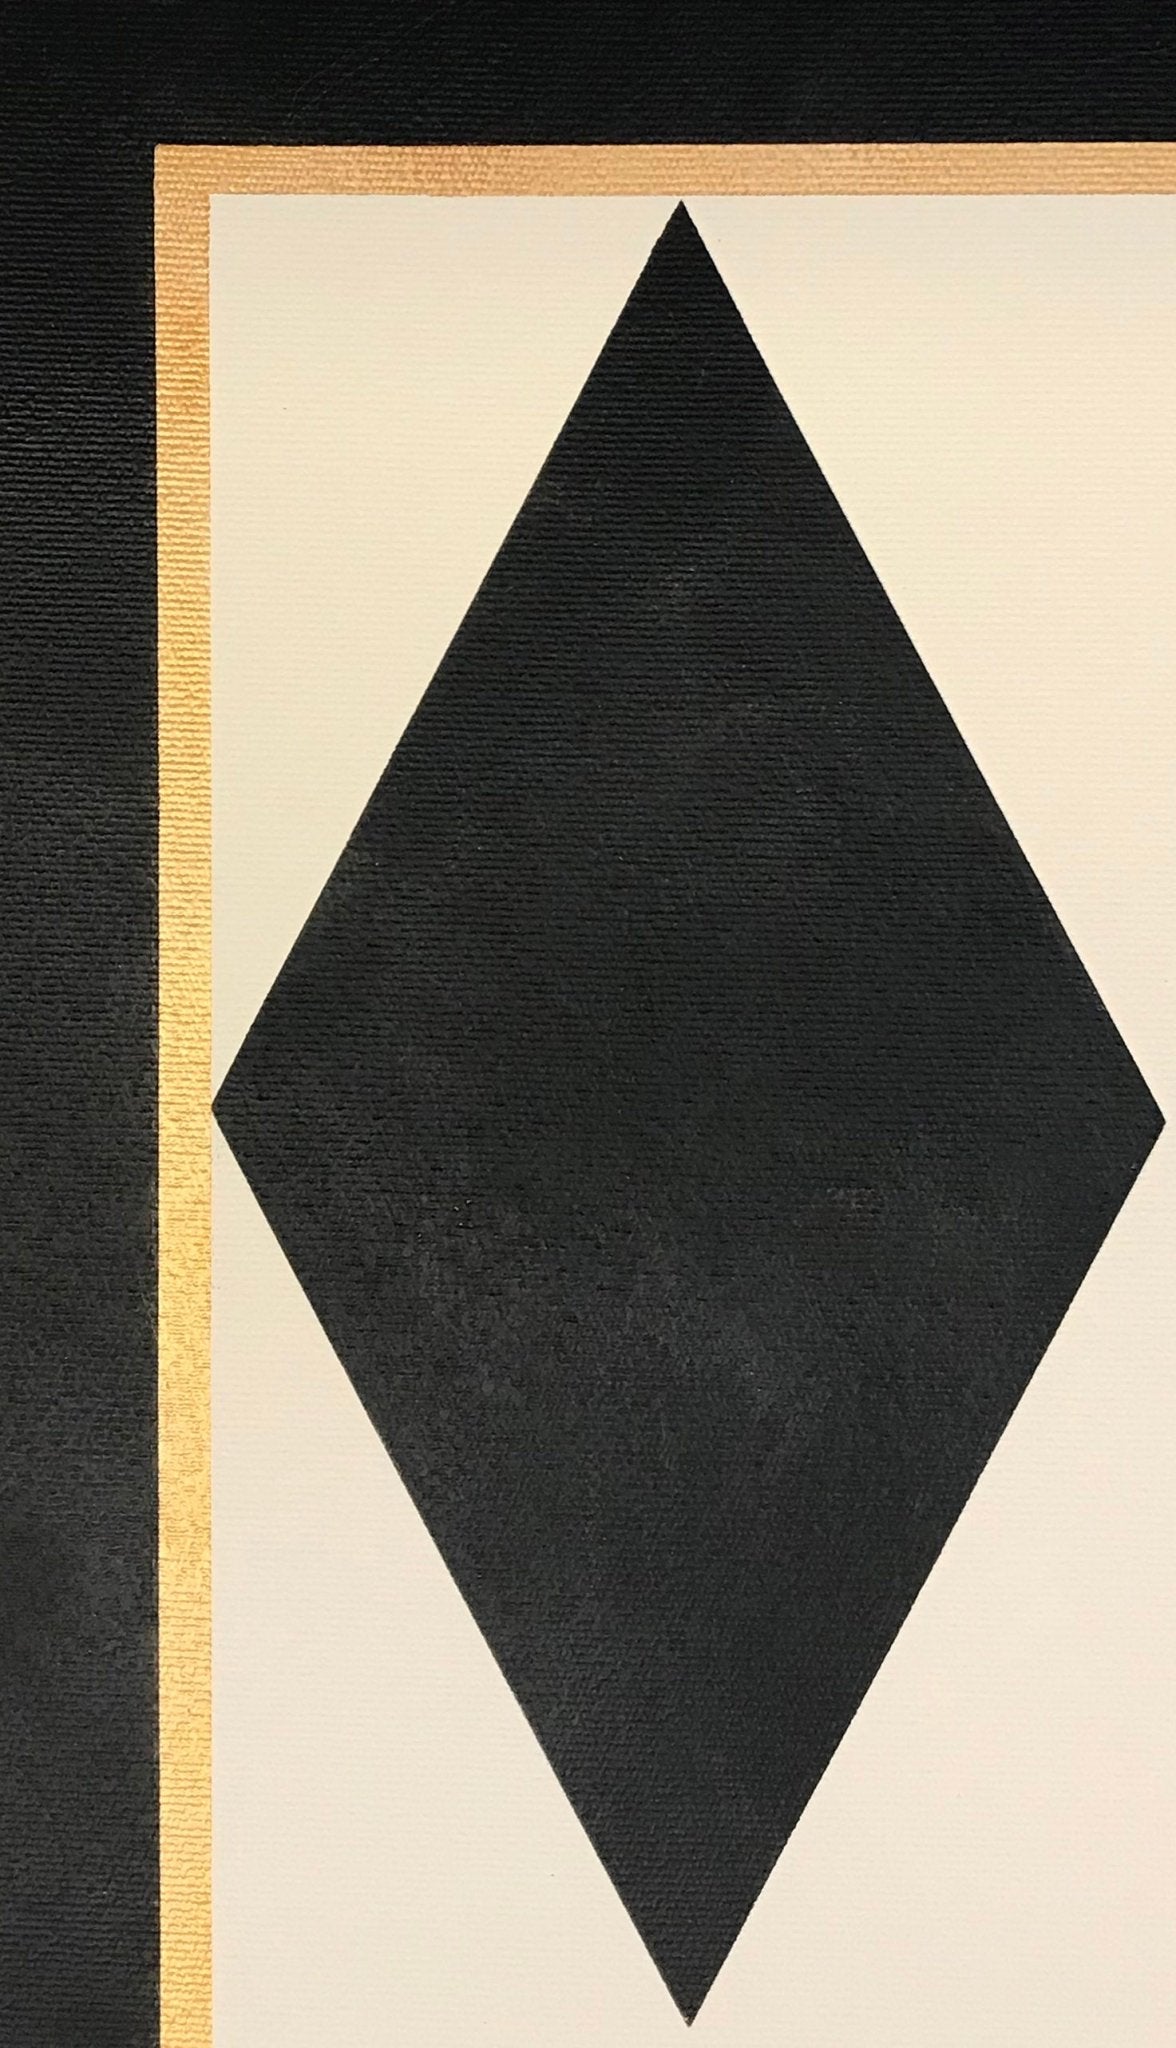 A close up of a corner of this floorcloth showing a full black diamond and border comprised of a thin gold accent line and a black band.